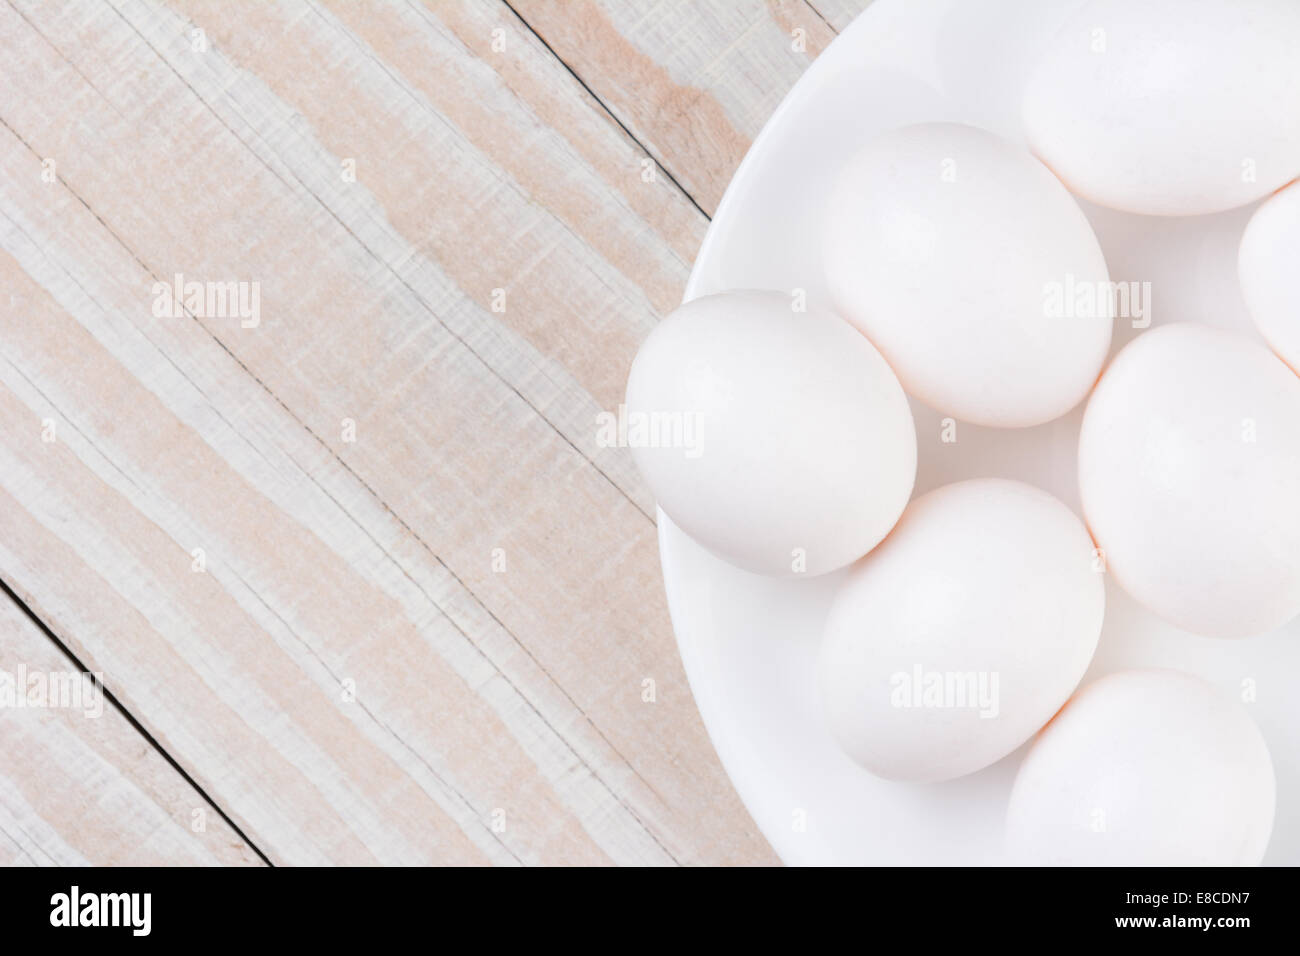 High angle view of a white bowl filled with white eggs on a white wooden rustic kitchen table. Horizontal format with copy space Stock Photo